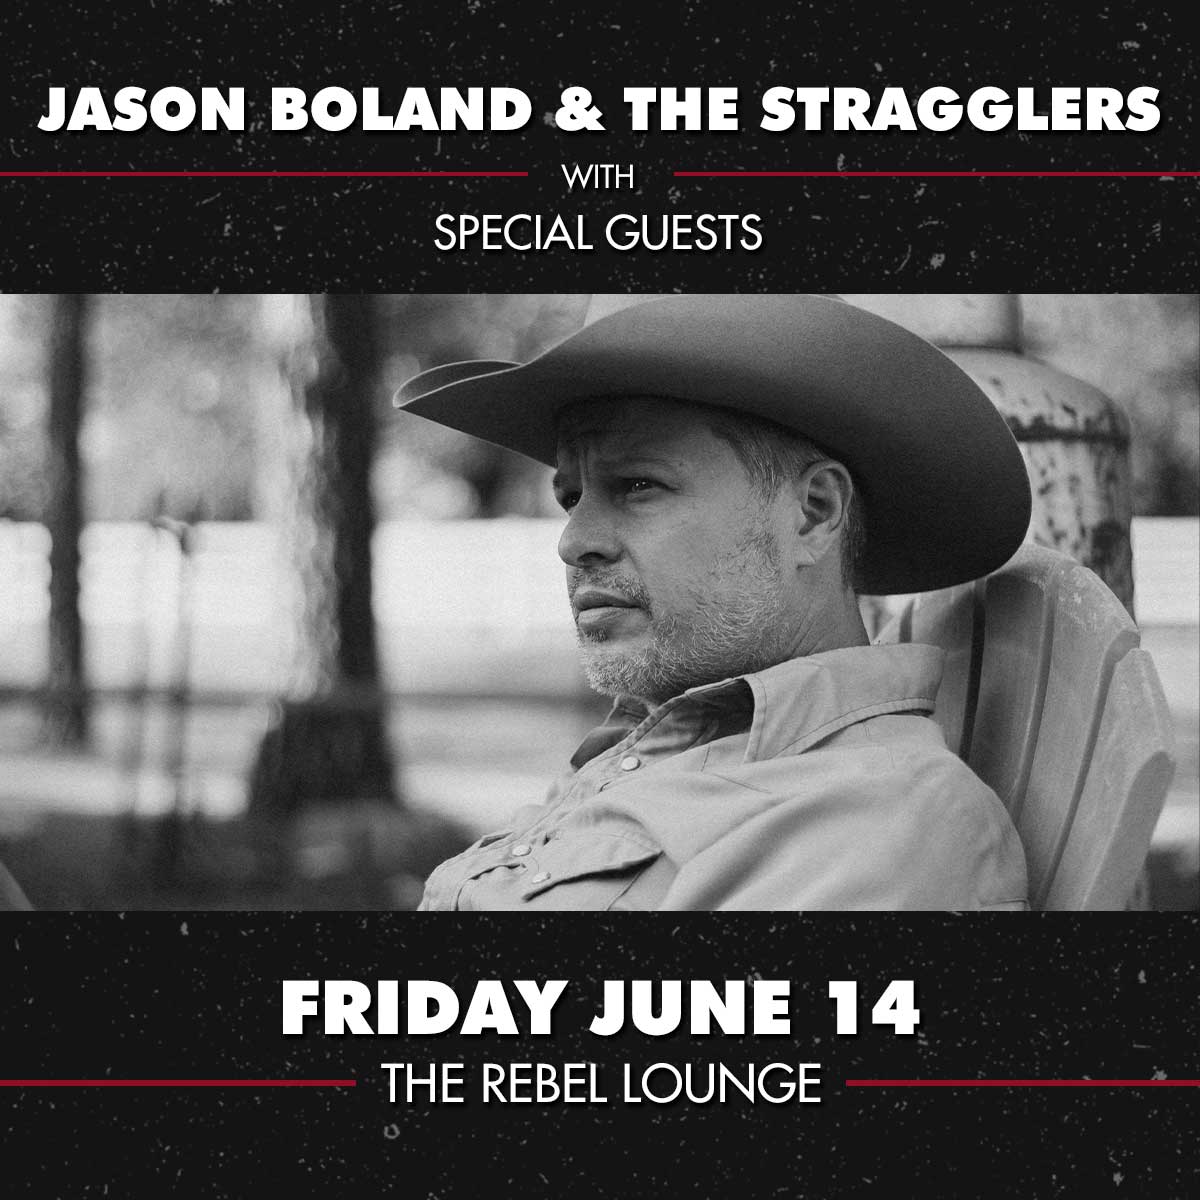 JASON BOLAND AND THE STRAGGLERS